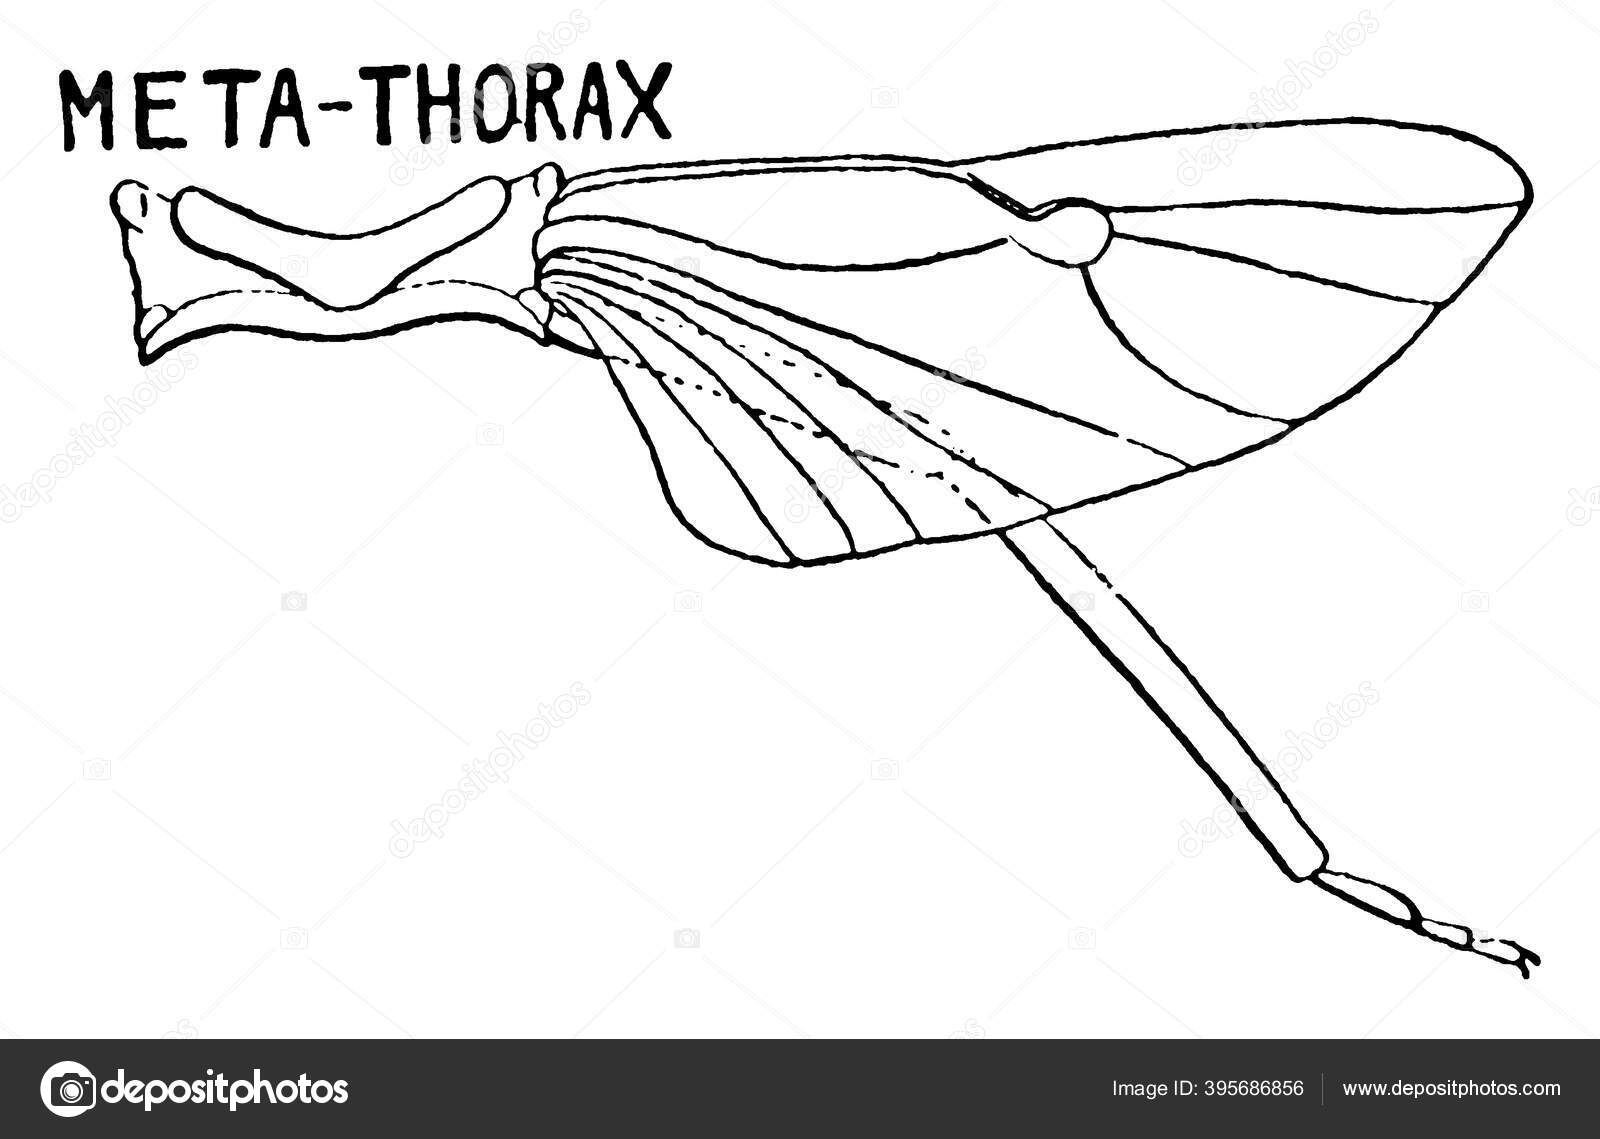 Body Section Stink Bug Head Called Thorax Diagram Show Metathorax Vector Image By C Morphart Vector Stock